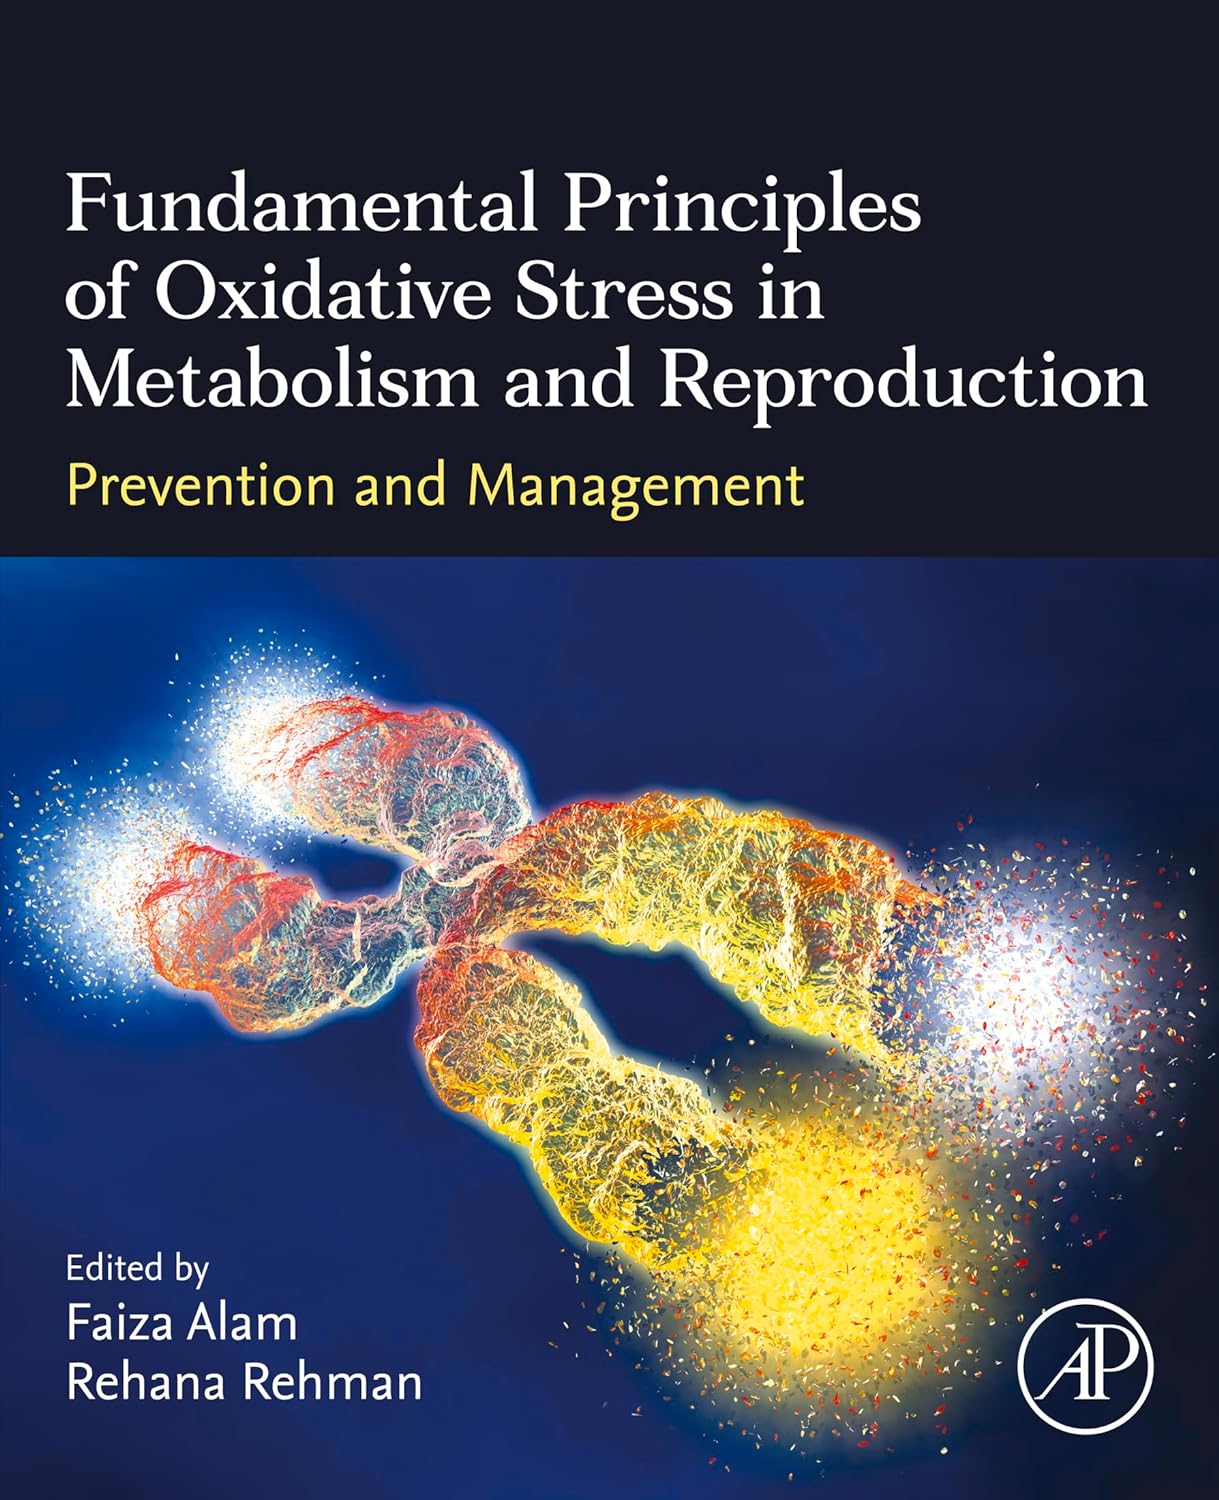 (EBook PDF)Fundamental Principles of Oxidative Stress in Metabolism and Reproduction: Prevention and Management by Faiza Alam MBBS M.Phil. PhD, Rehana Rehman MBBS M.Phil. PhD